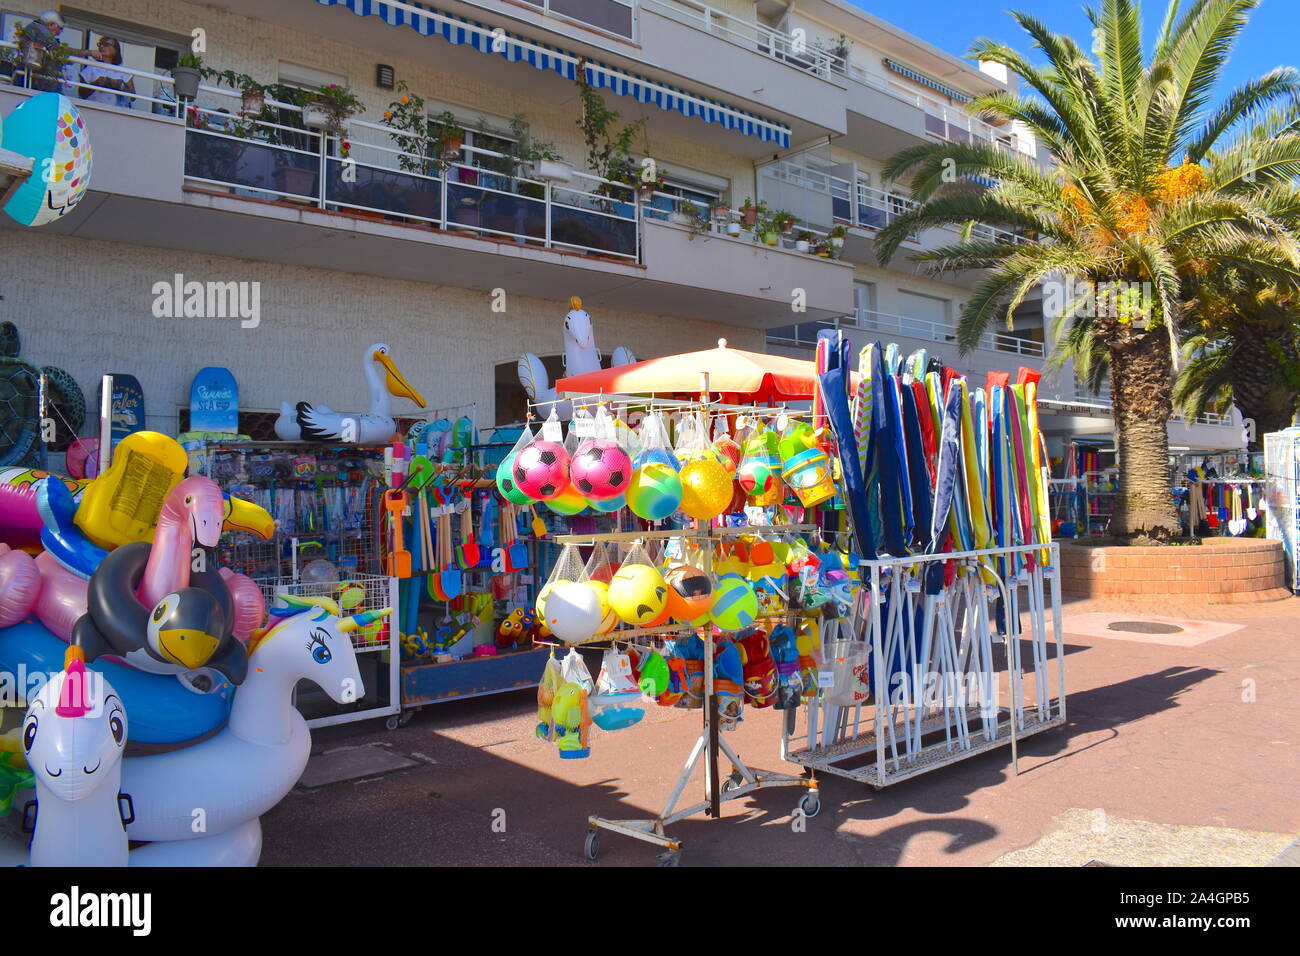 Well stocked shop on the promenade in south of France selling pool and beach floats and inflatables, beach games, beach sets and toys. Tall palm tree. Stock Photo